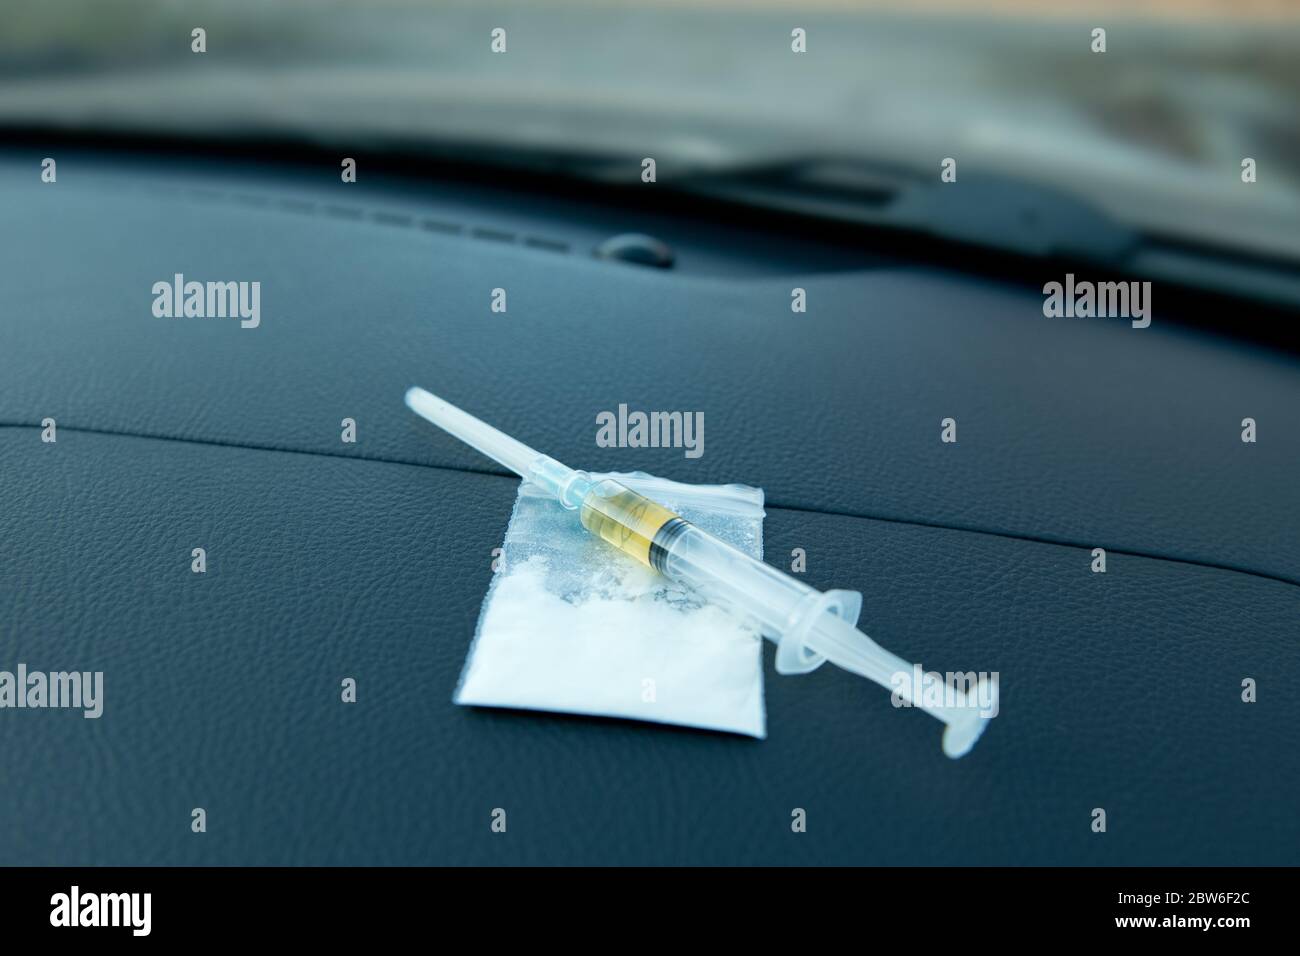 a syringe and a bag with a dose of the drug lie on the dashboard of the car Stock Photo